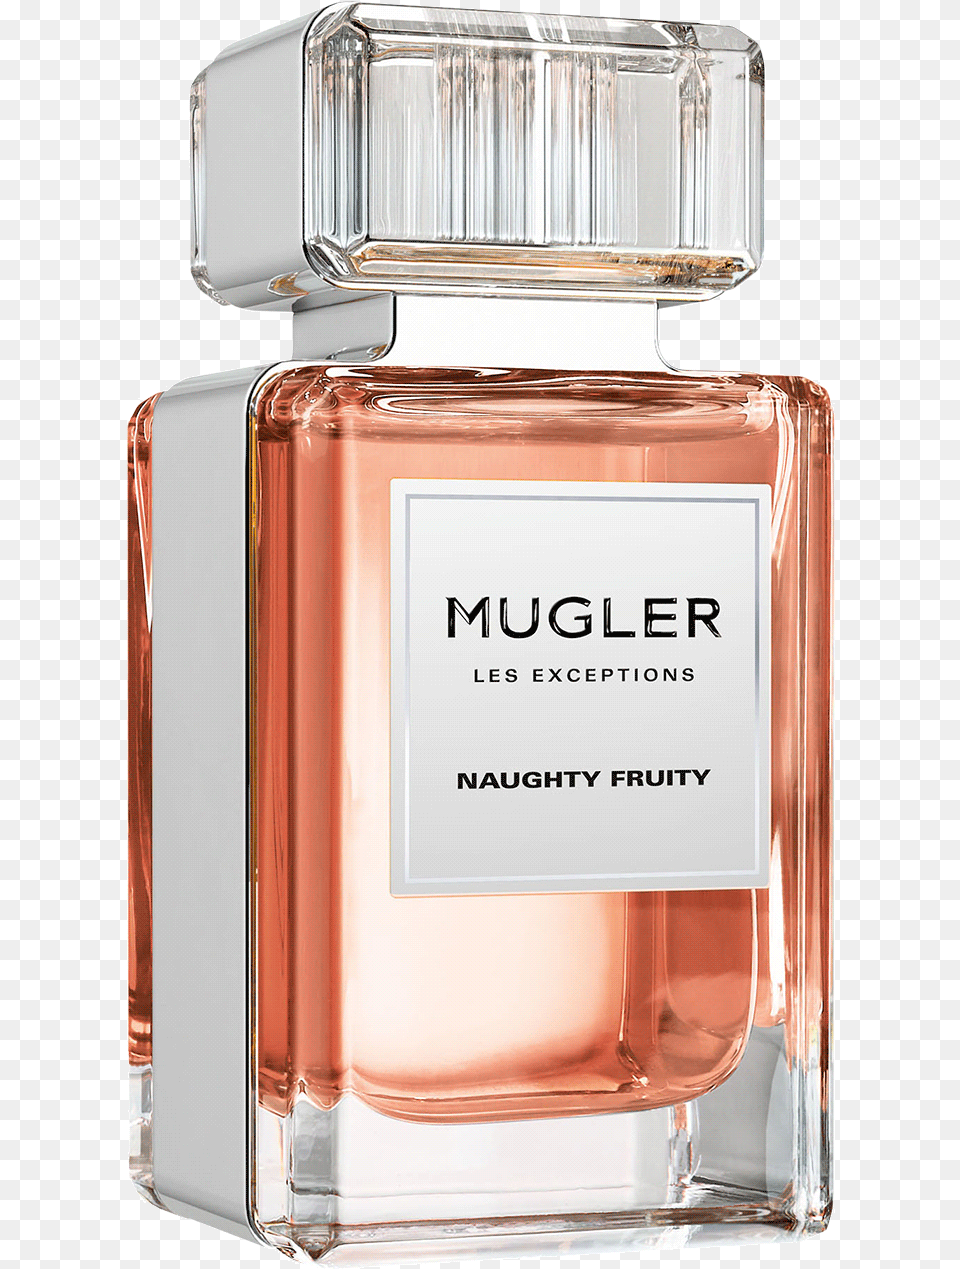 Les Exceptions 11th Naughty Fruity Mugler Parfum, Bottle, Cosmetics, Perfume Png